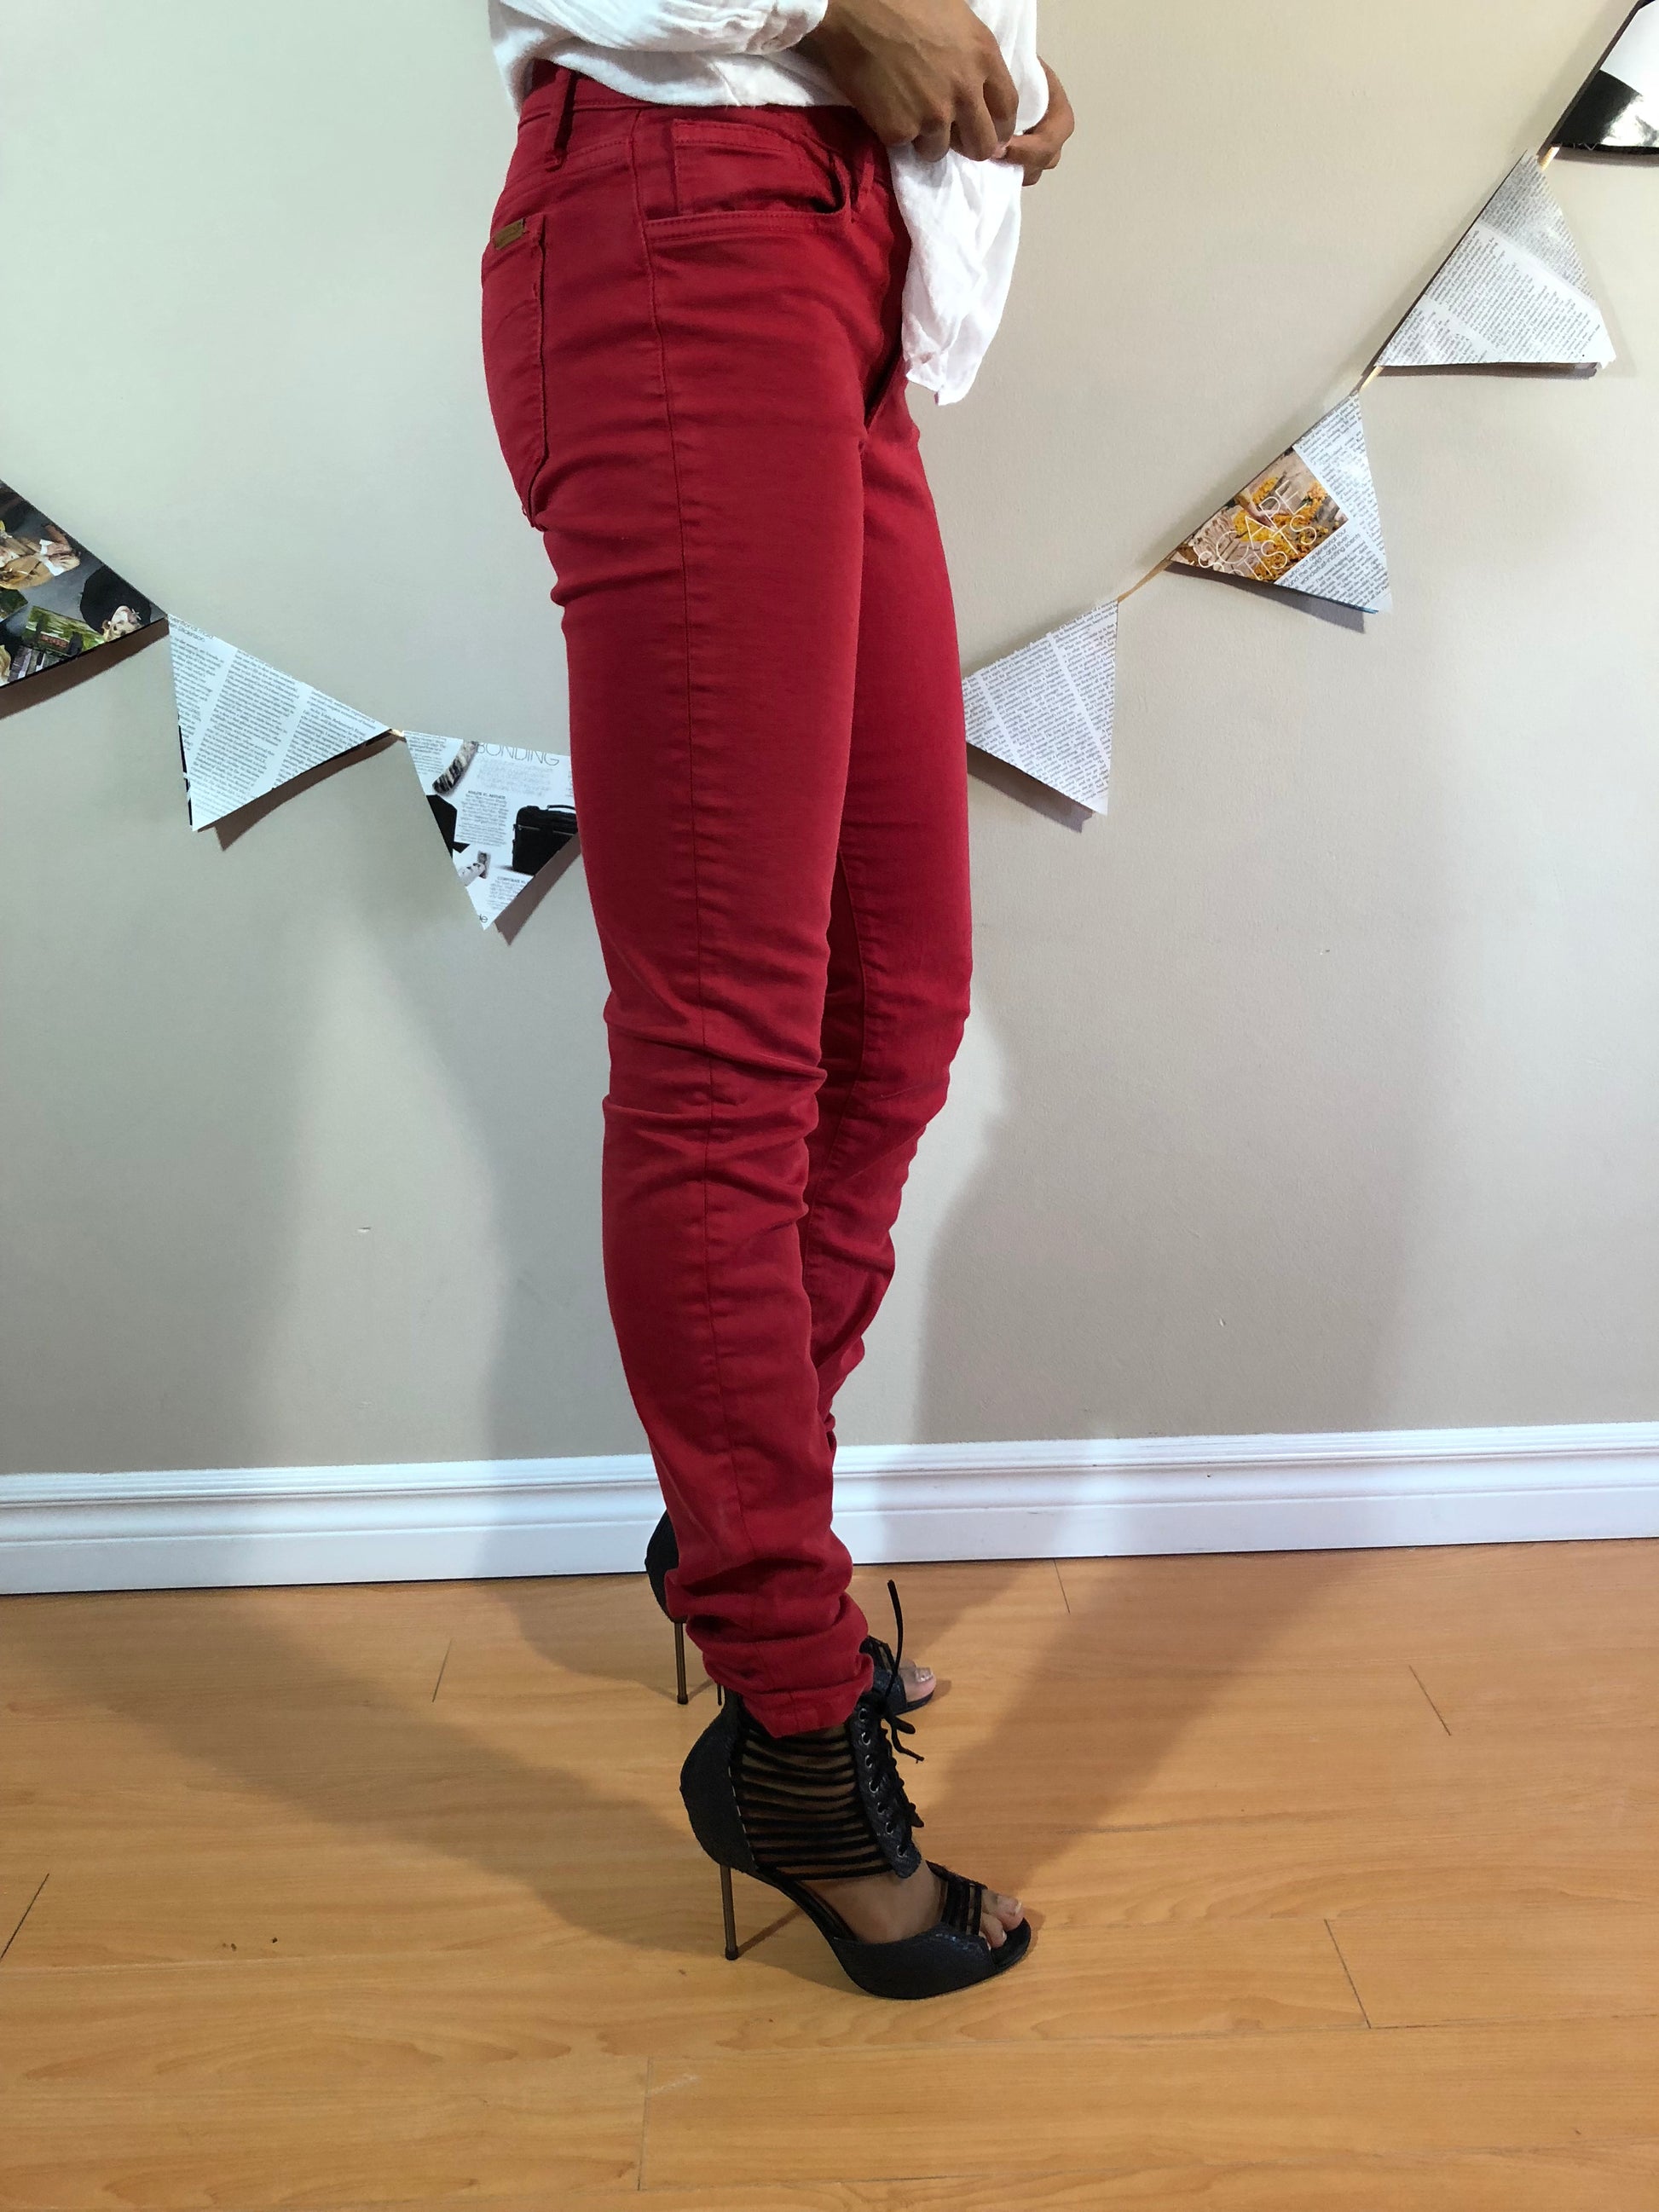 Joe's Jeans Red Mid Rise Skinny Ankle Pants - Size 25 Tall – Le